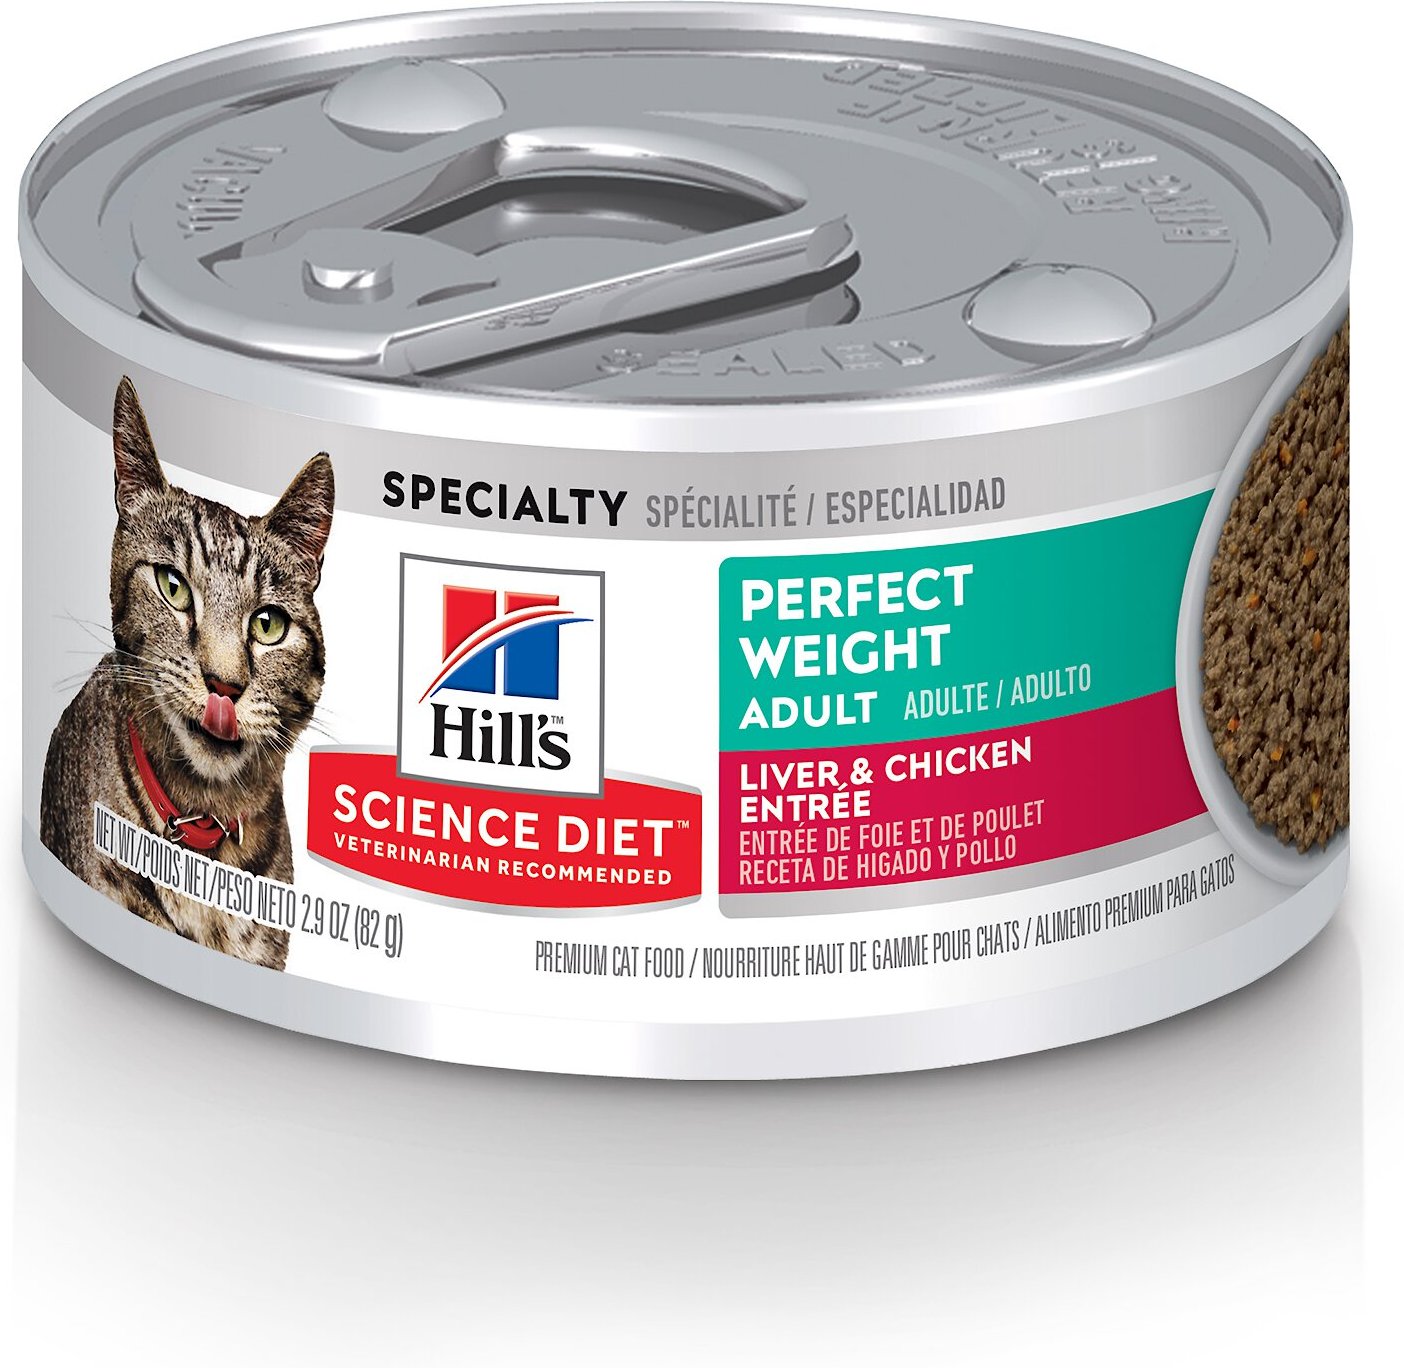 HILL'S SCIENCE DIET Adult Perfect Weight Liver & Chicken Entree Canned